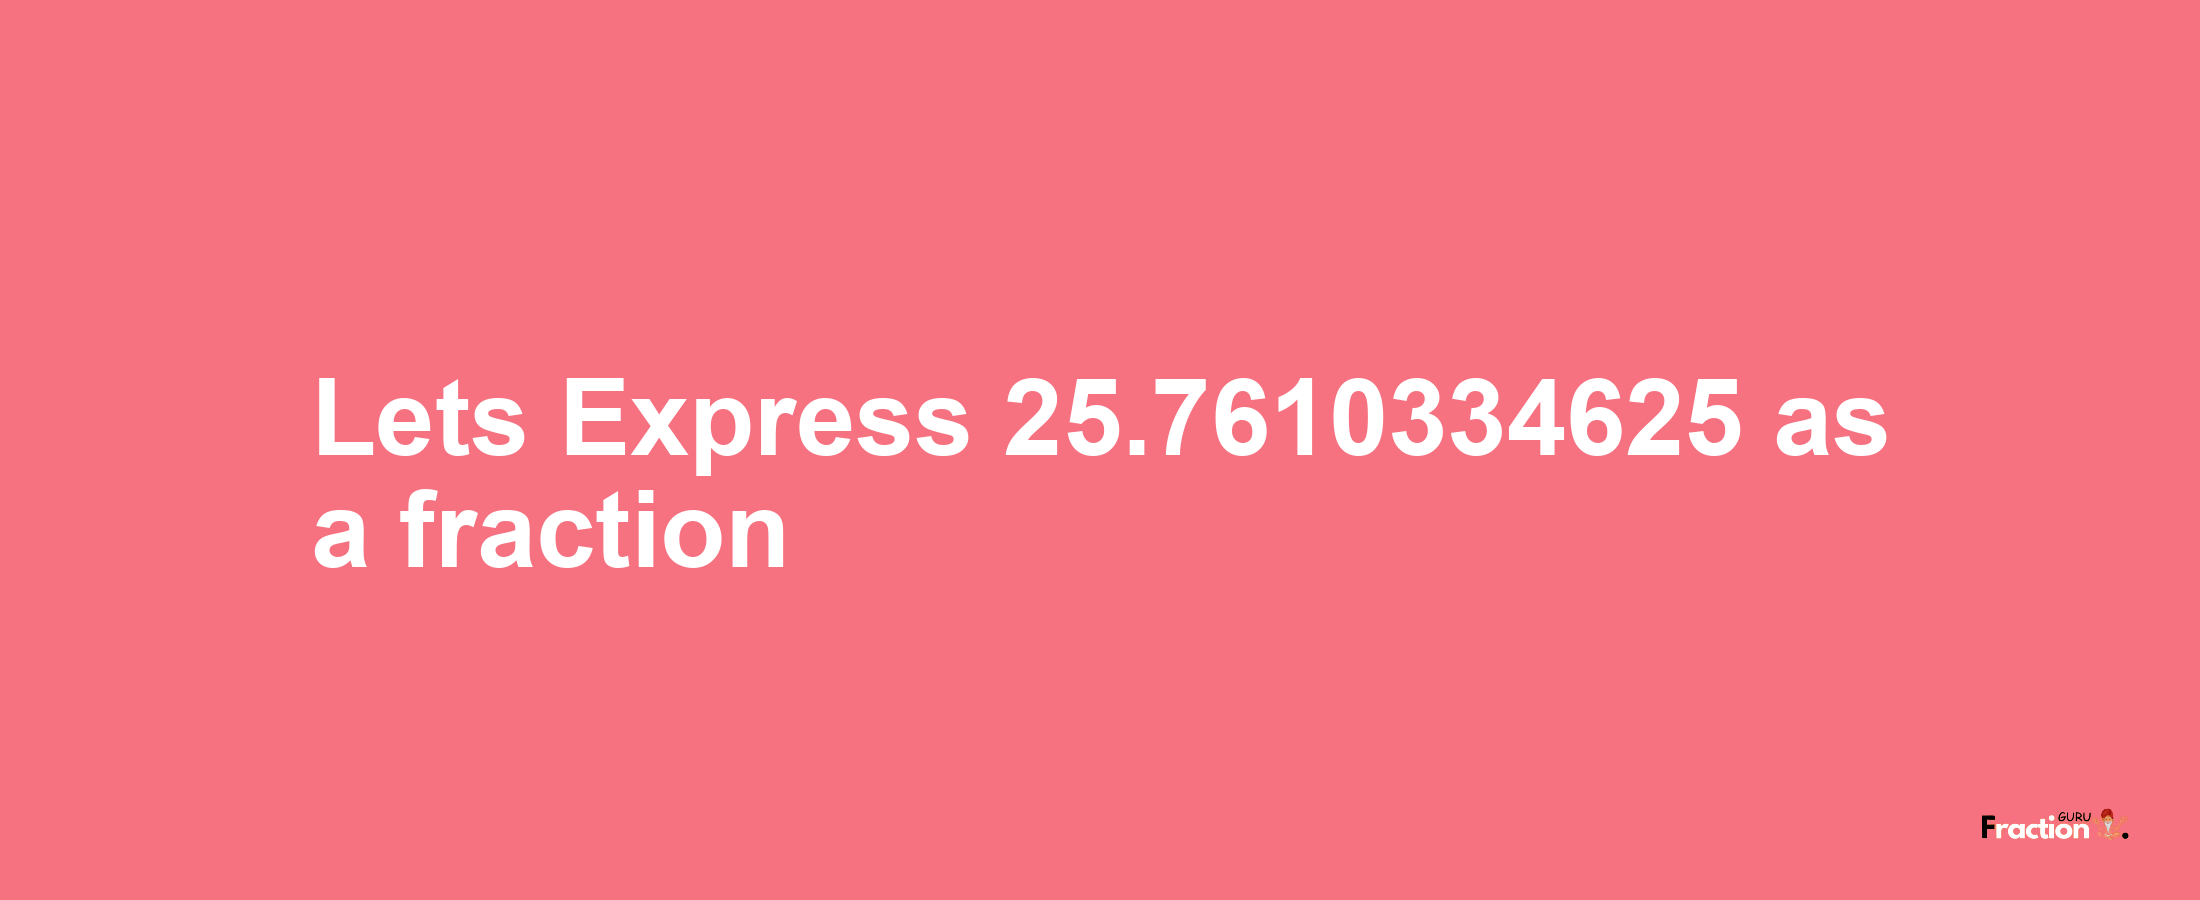 Lets Express 25.7610334625 as afraction